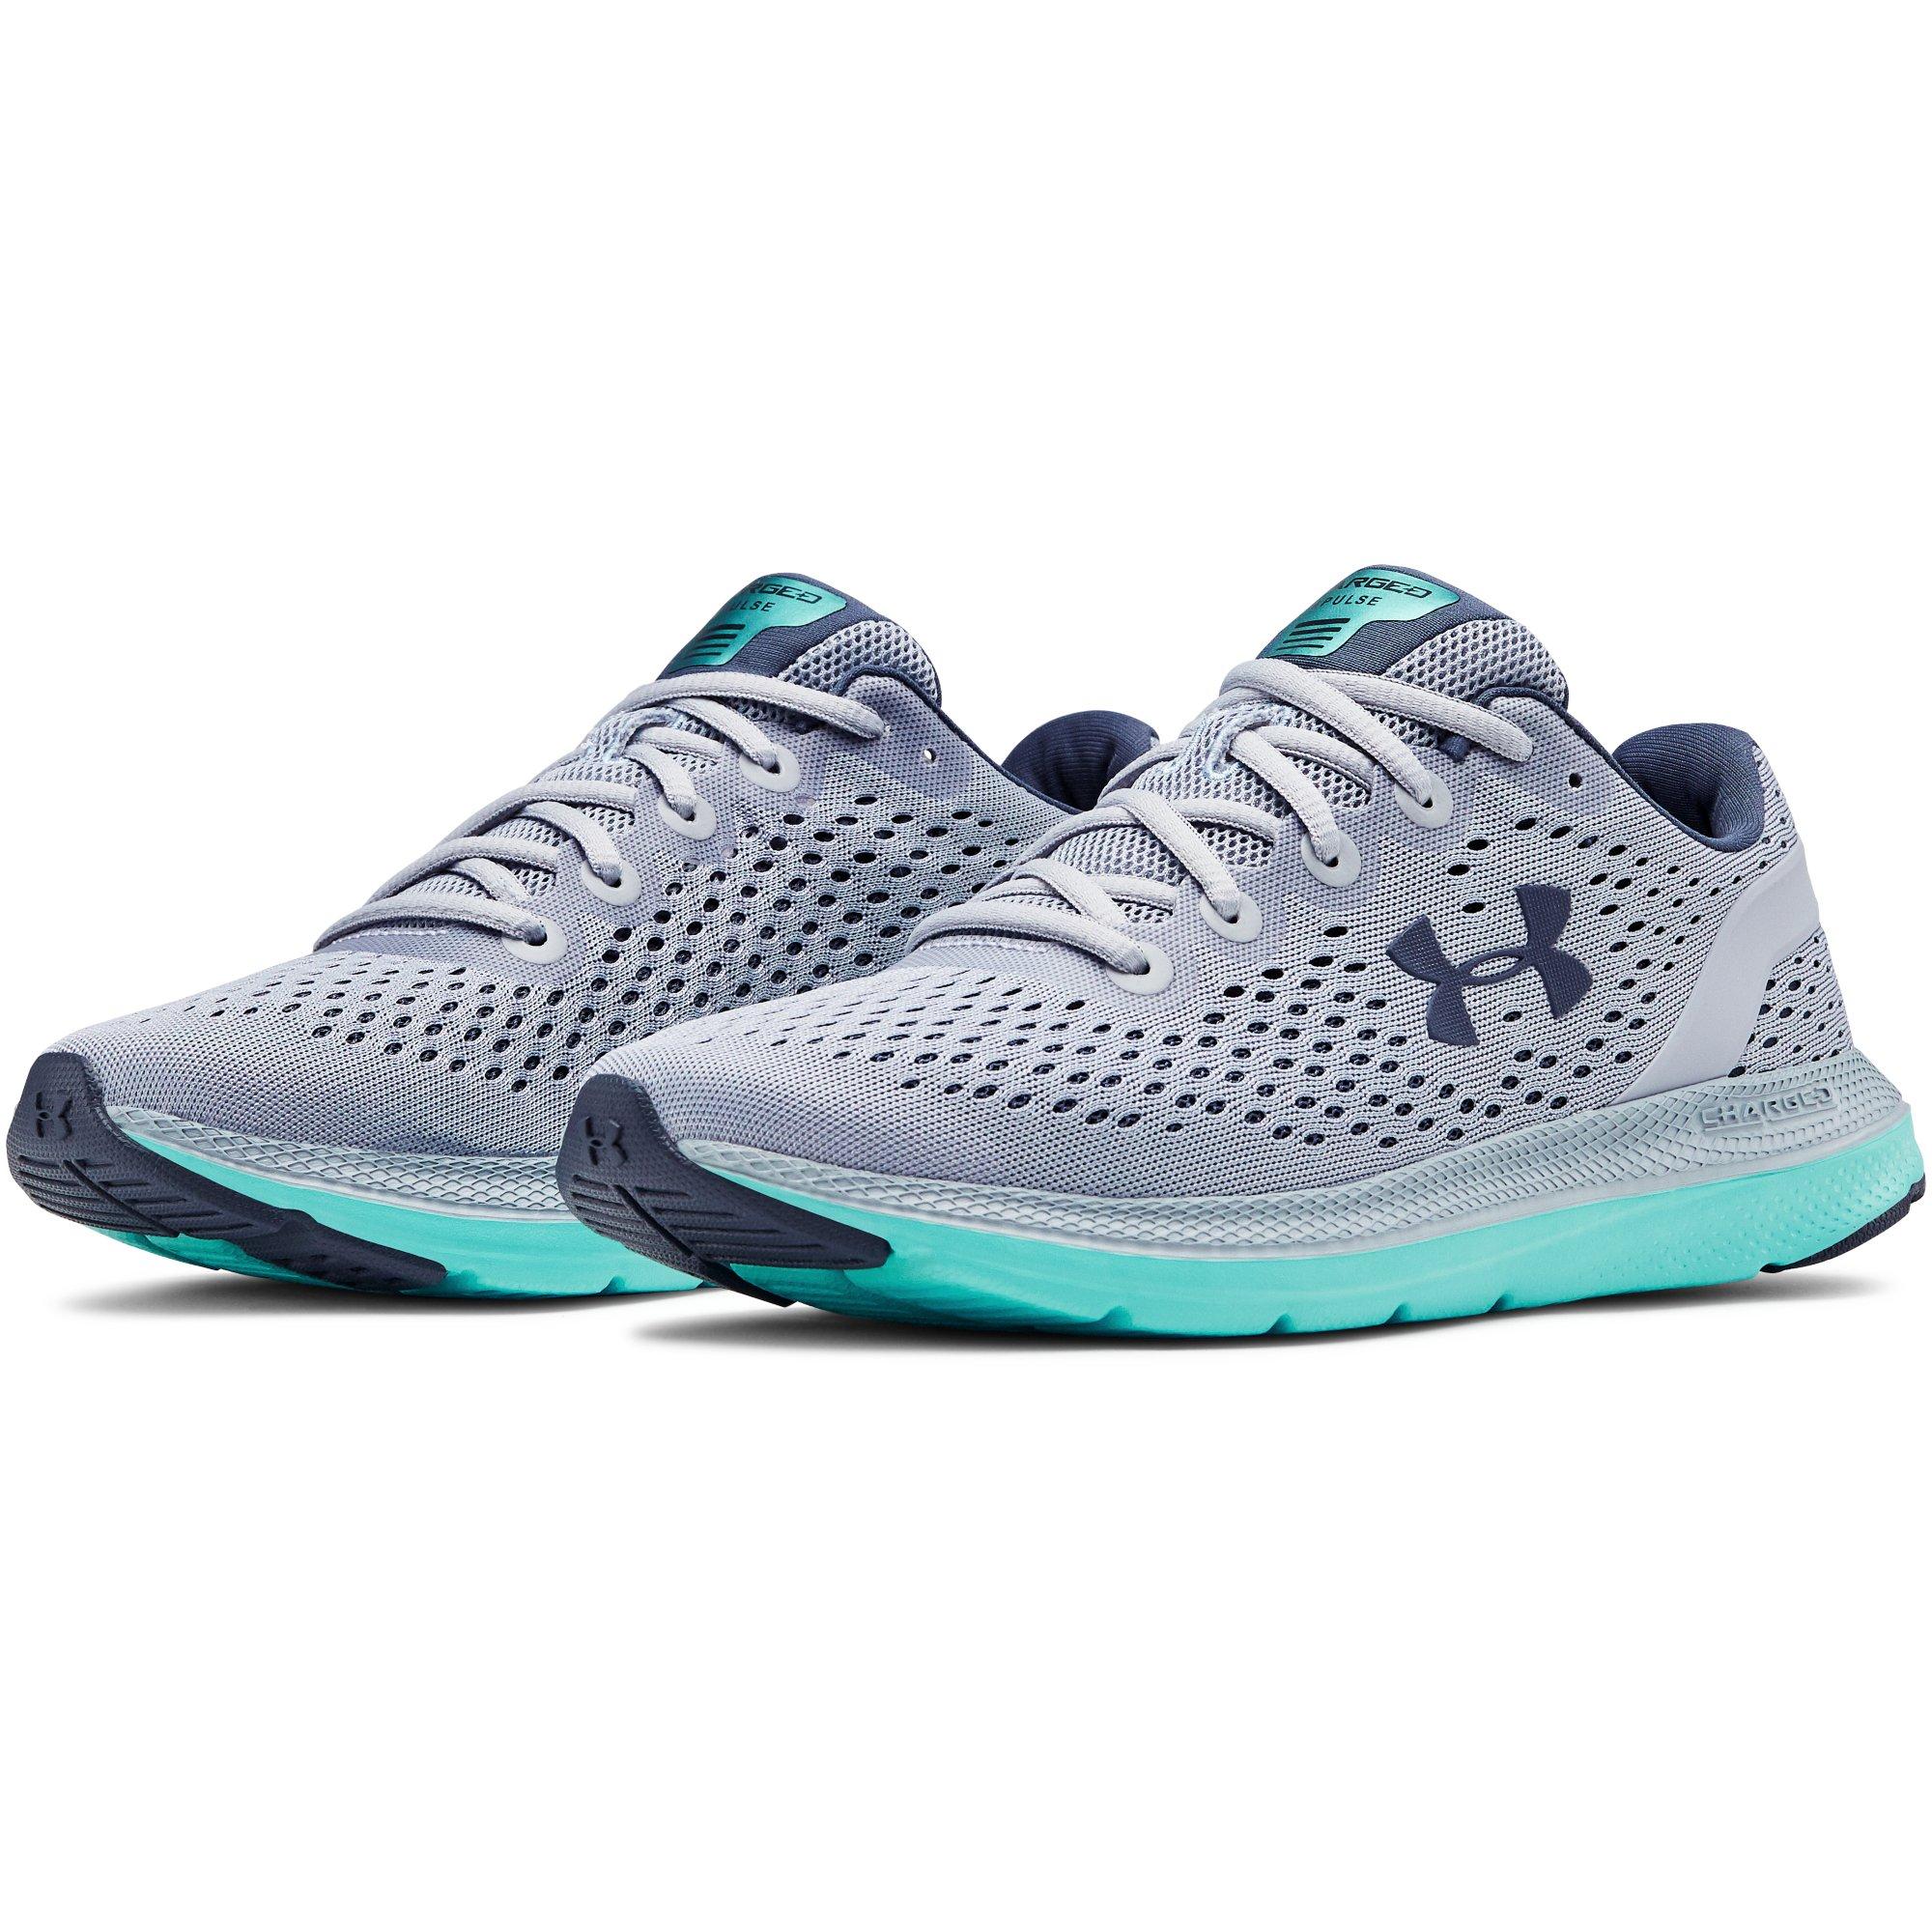 under armour grey and blue shoes